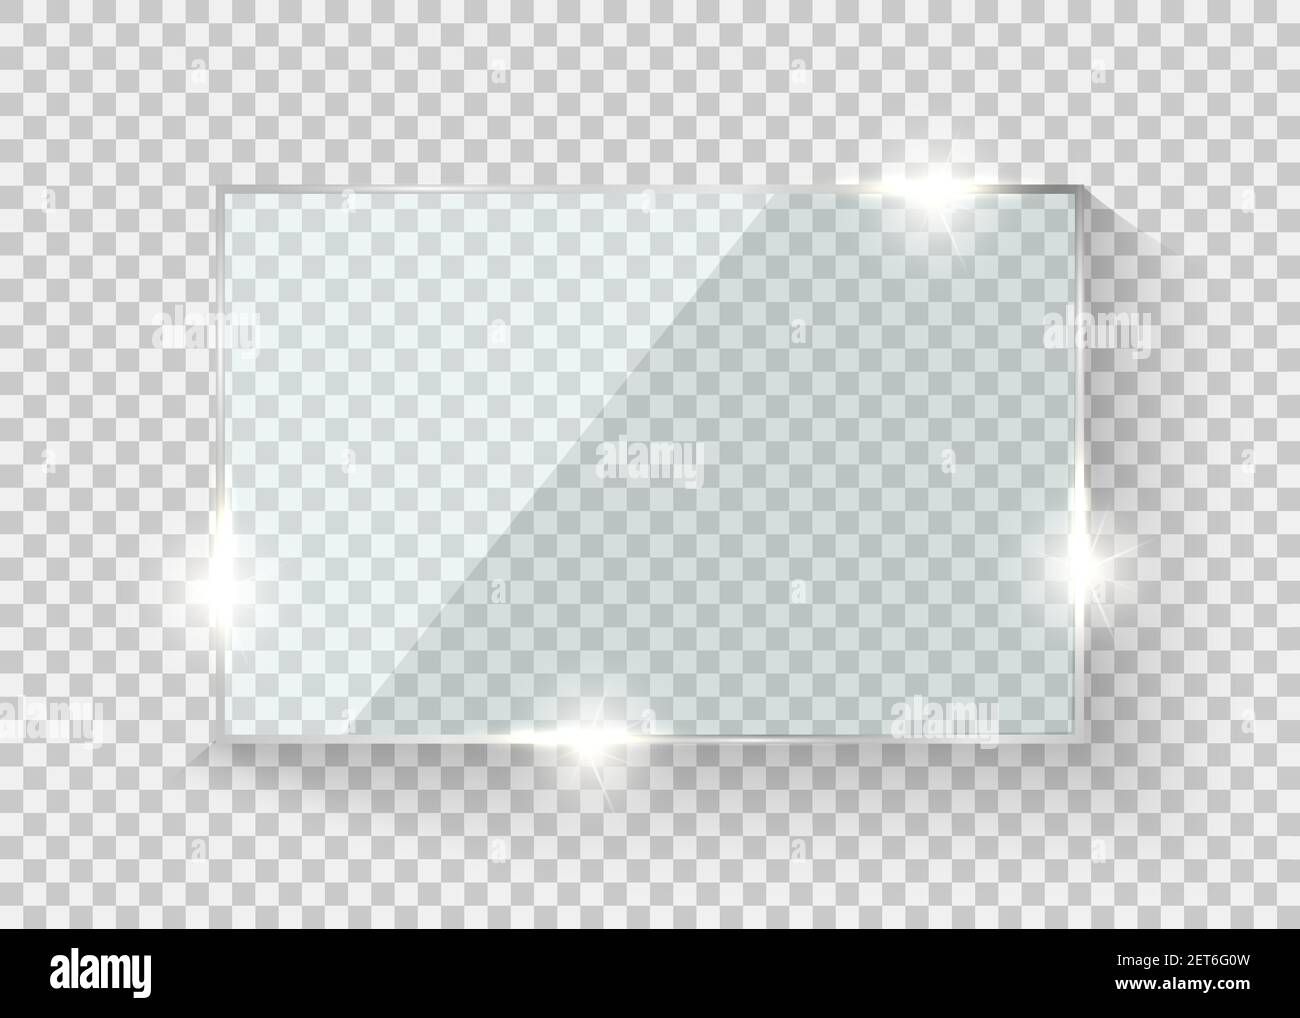 Premium Vector  Vector glass transparency effect window mirror reflection  glare png glass png window